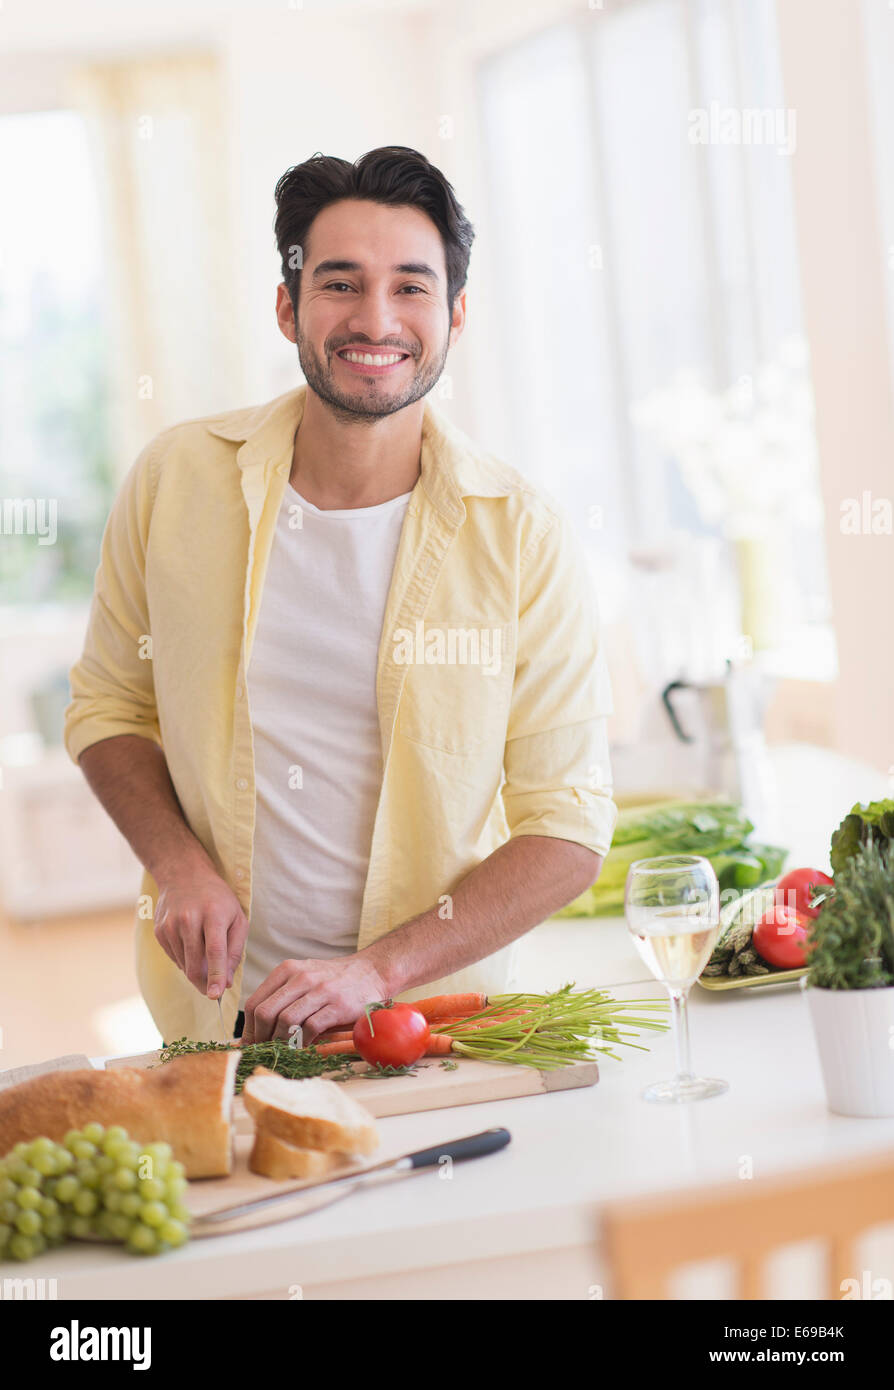 Mixed race man cooking in kitchen Stock Photo